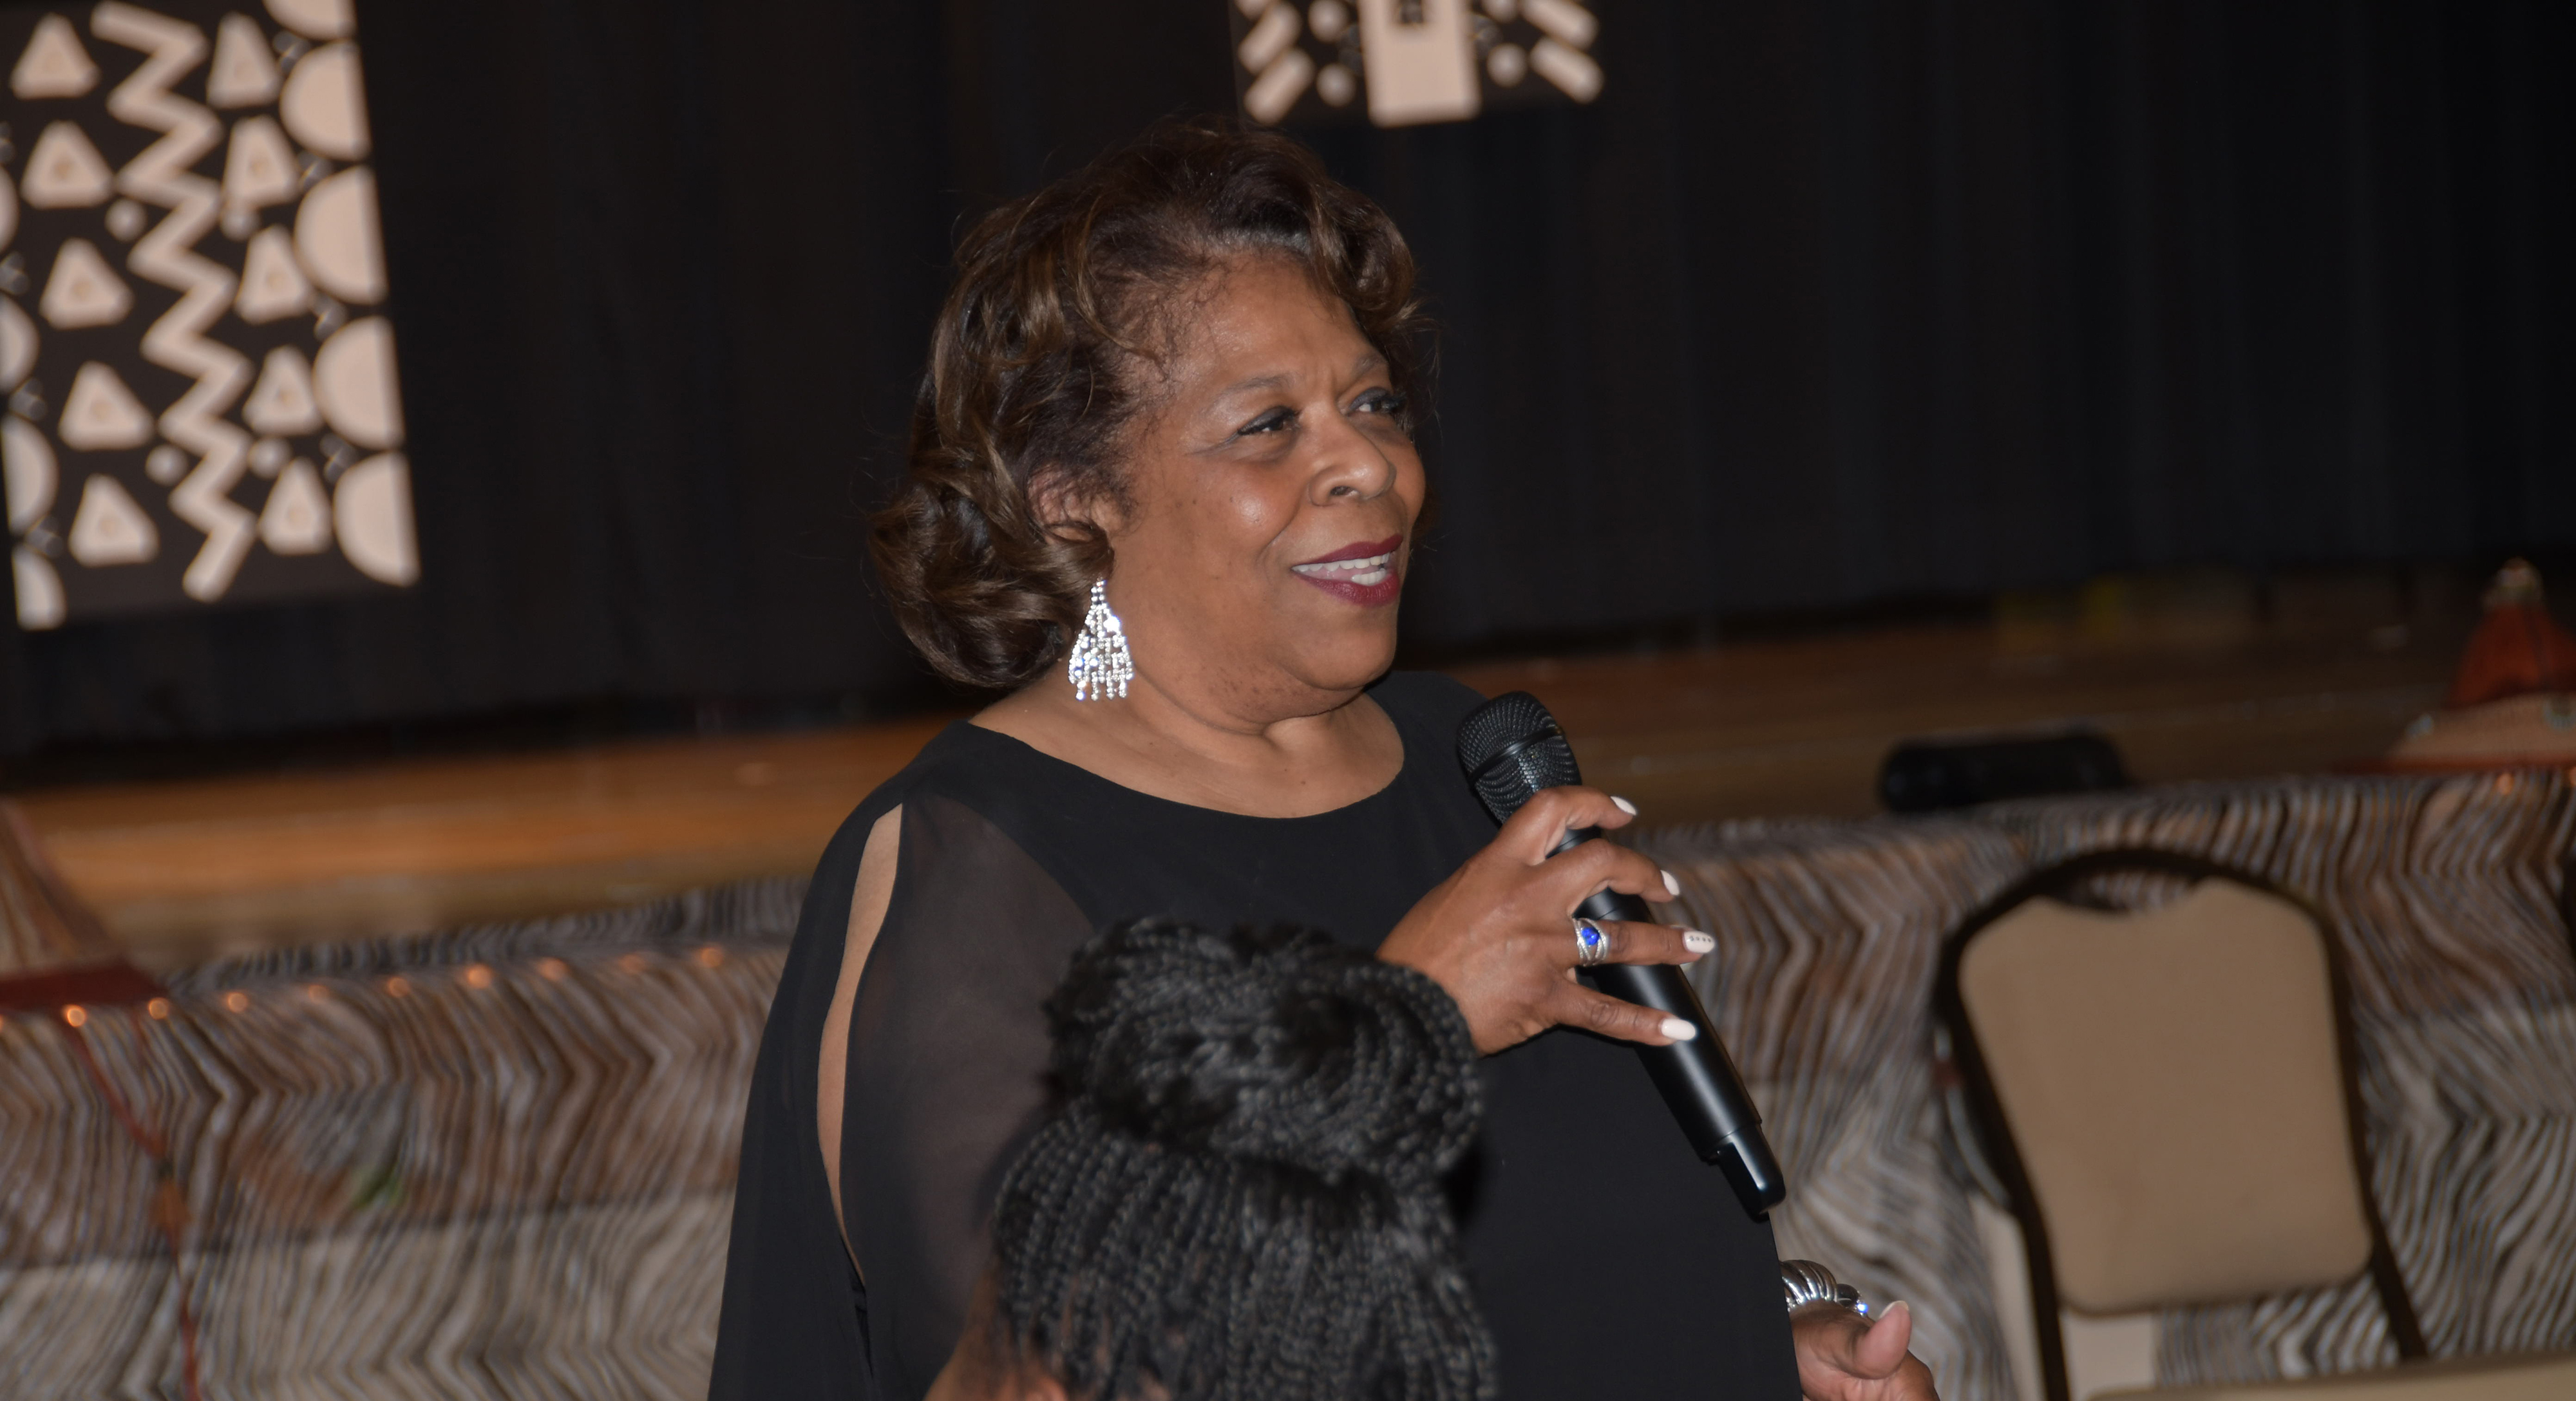 University President Wilma Mishoe speaks after the Inner City Cultural League announced her as its recipient of the 2019 Sankofa Golden Phenomenal Woman Award.